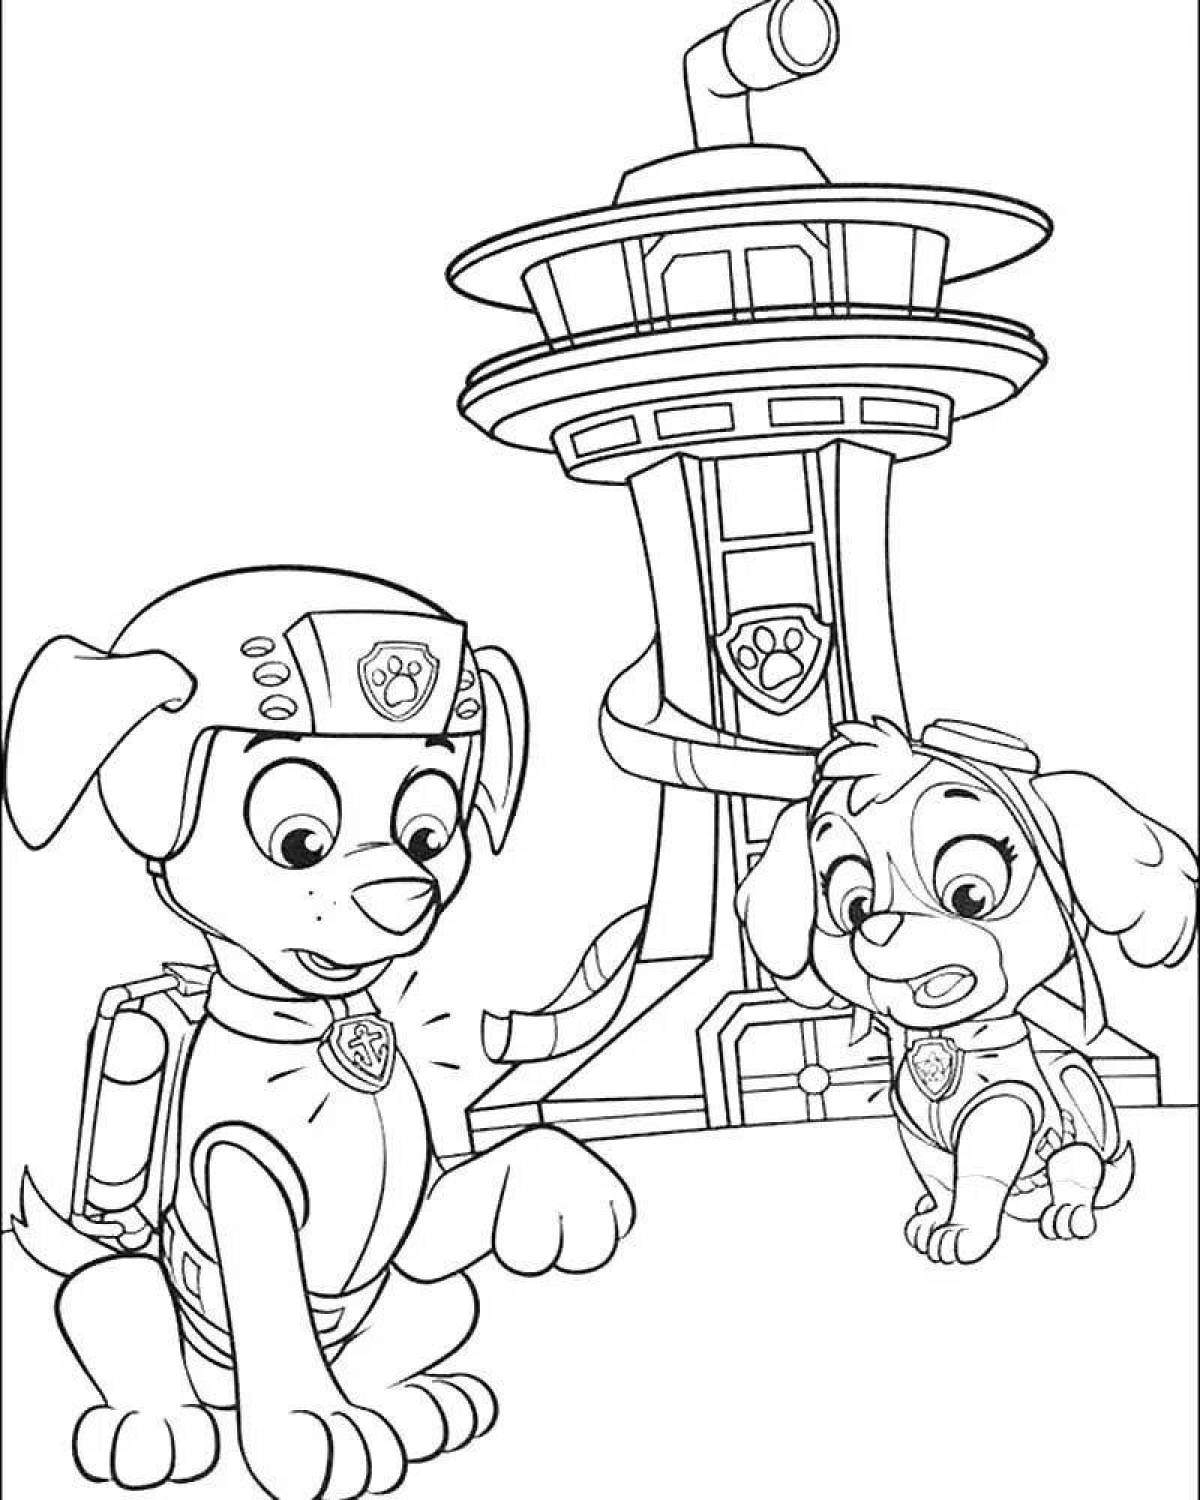 Great mega sky coloring page